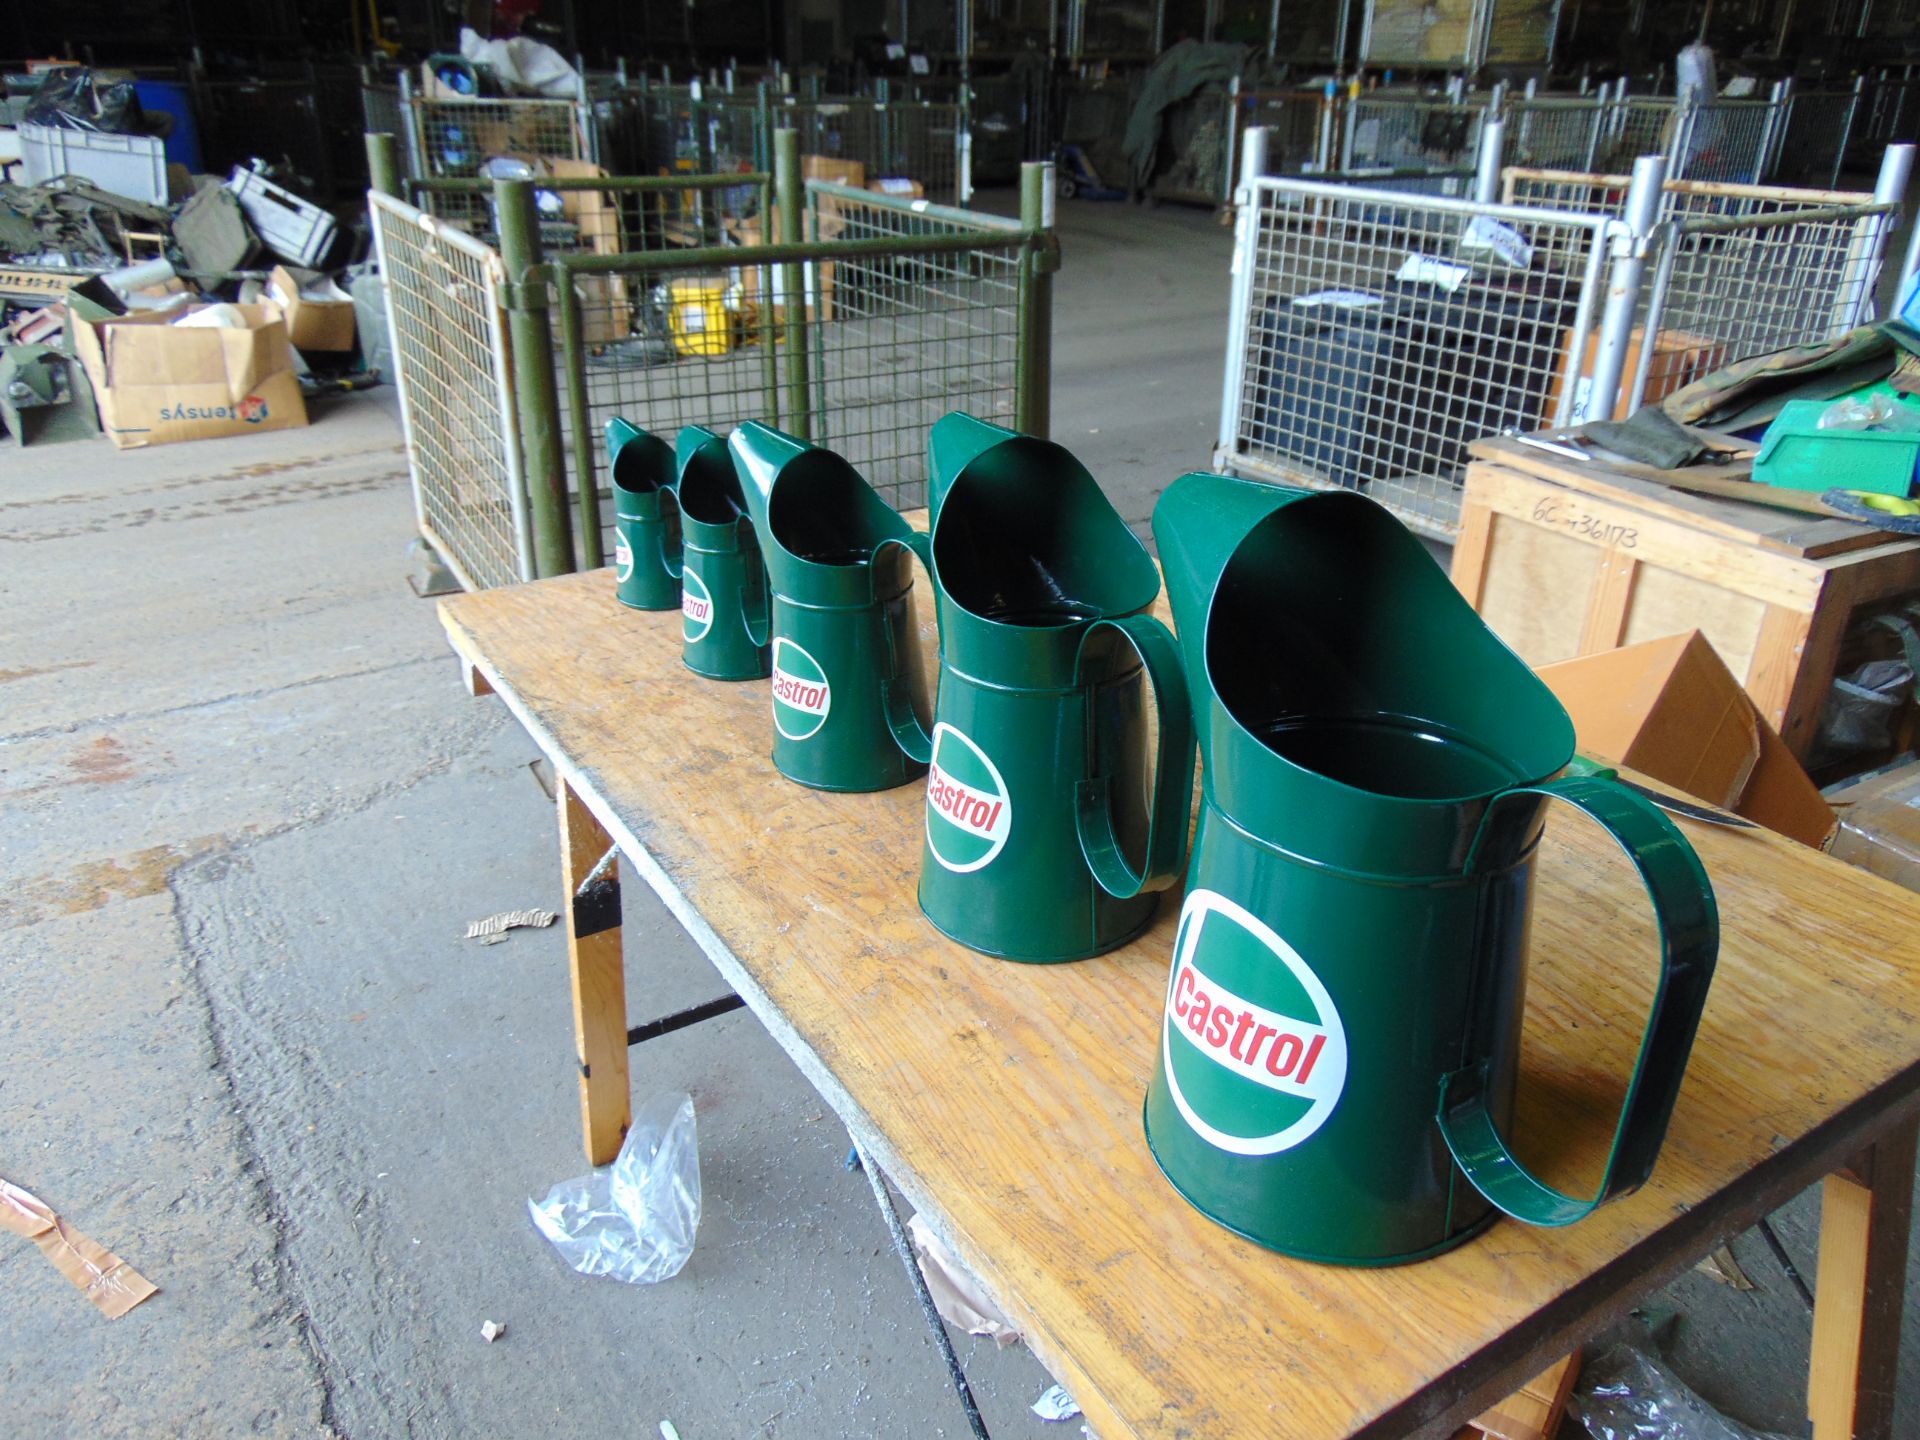 Set of 5 New Unissued Castrol Oil Jugs - Image 6 of 10